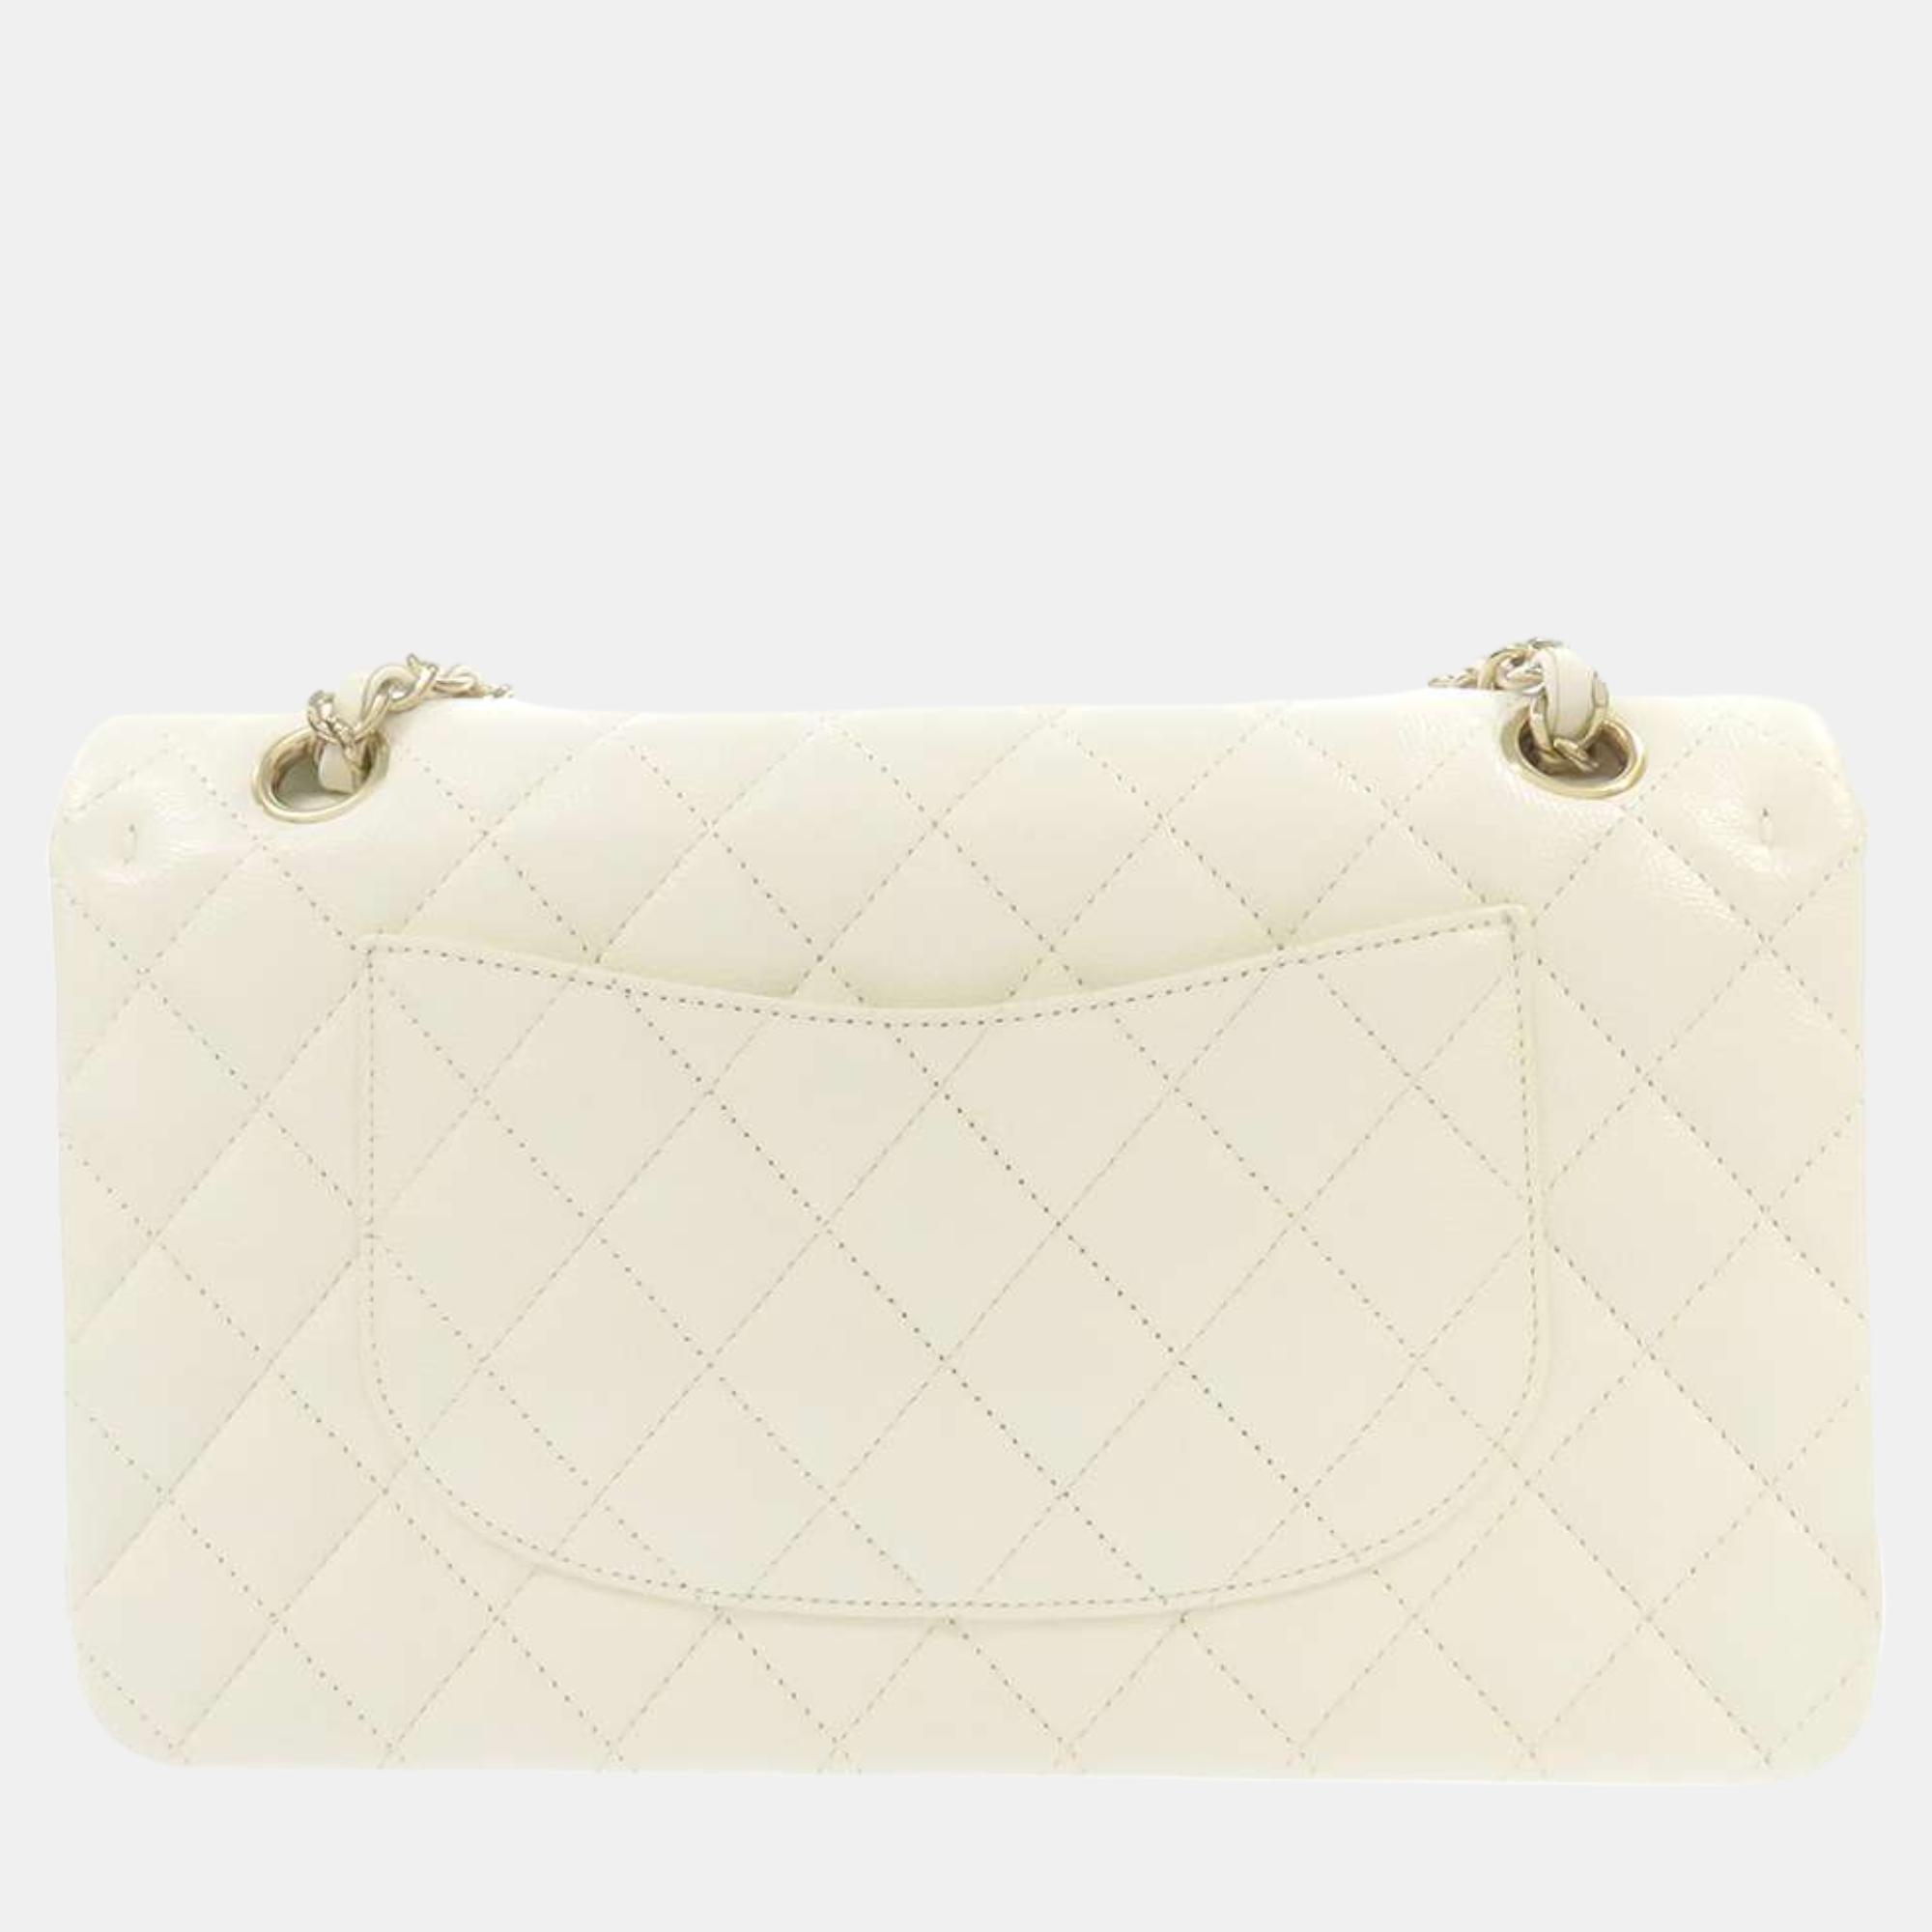 Chanel White Leather Classic Double Flap Bag